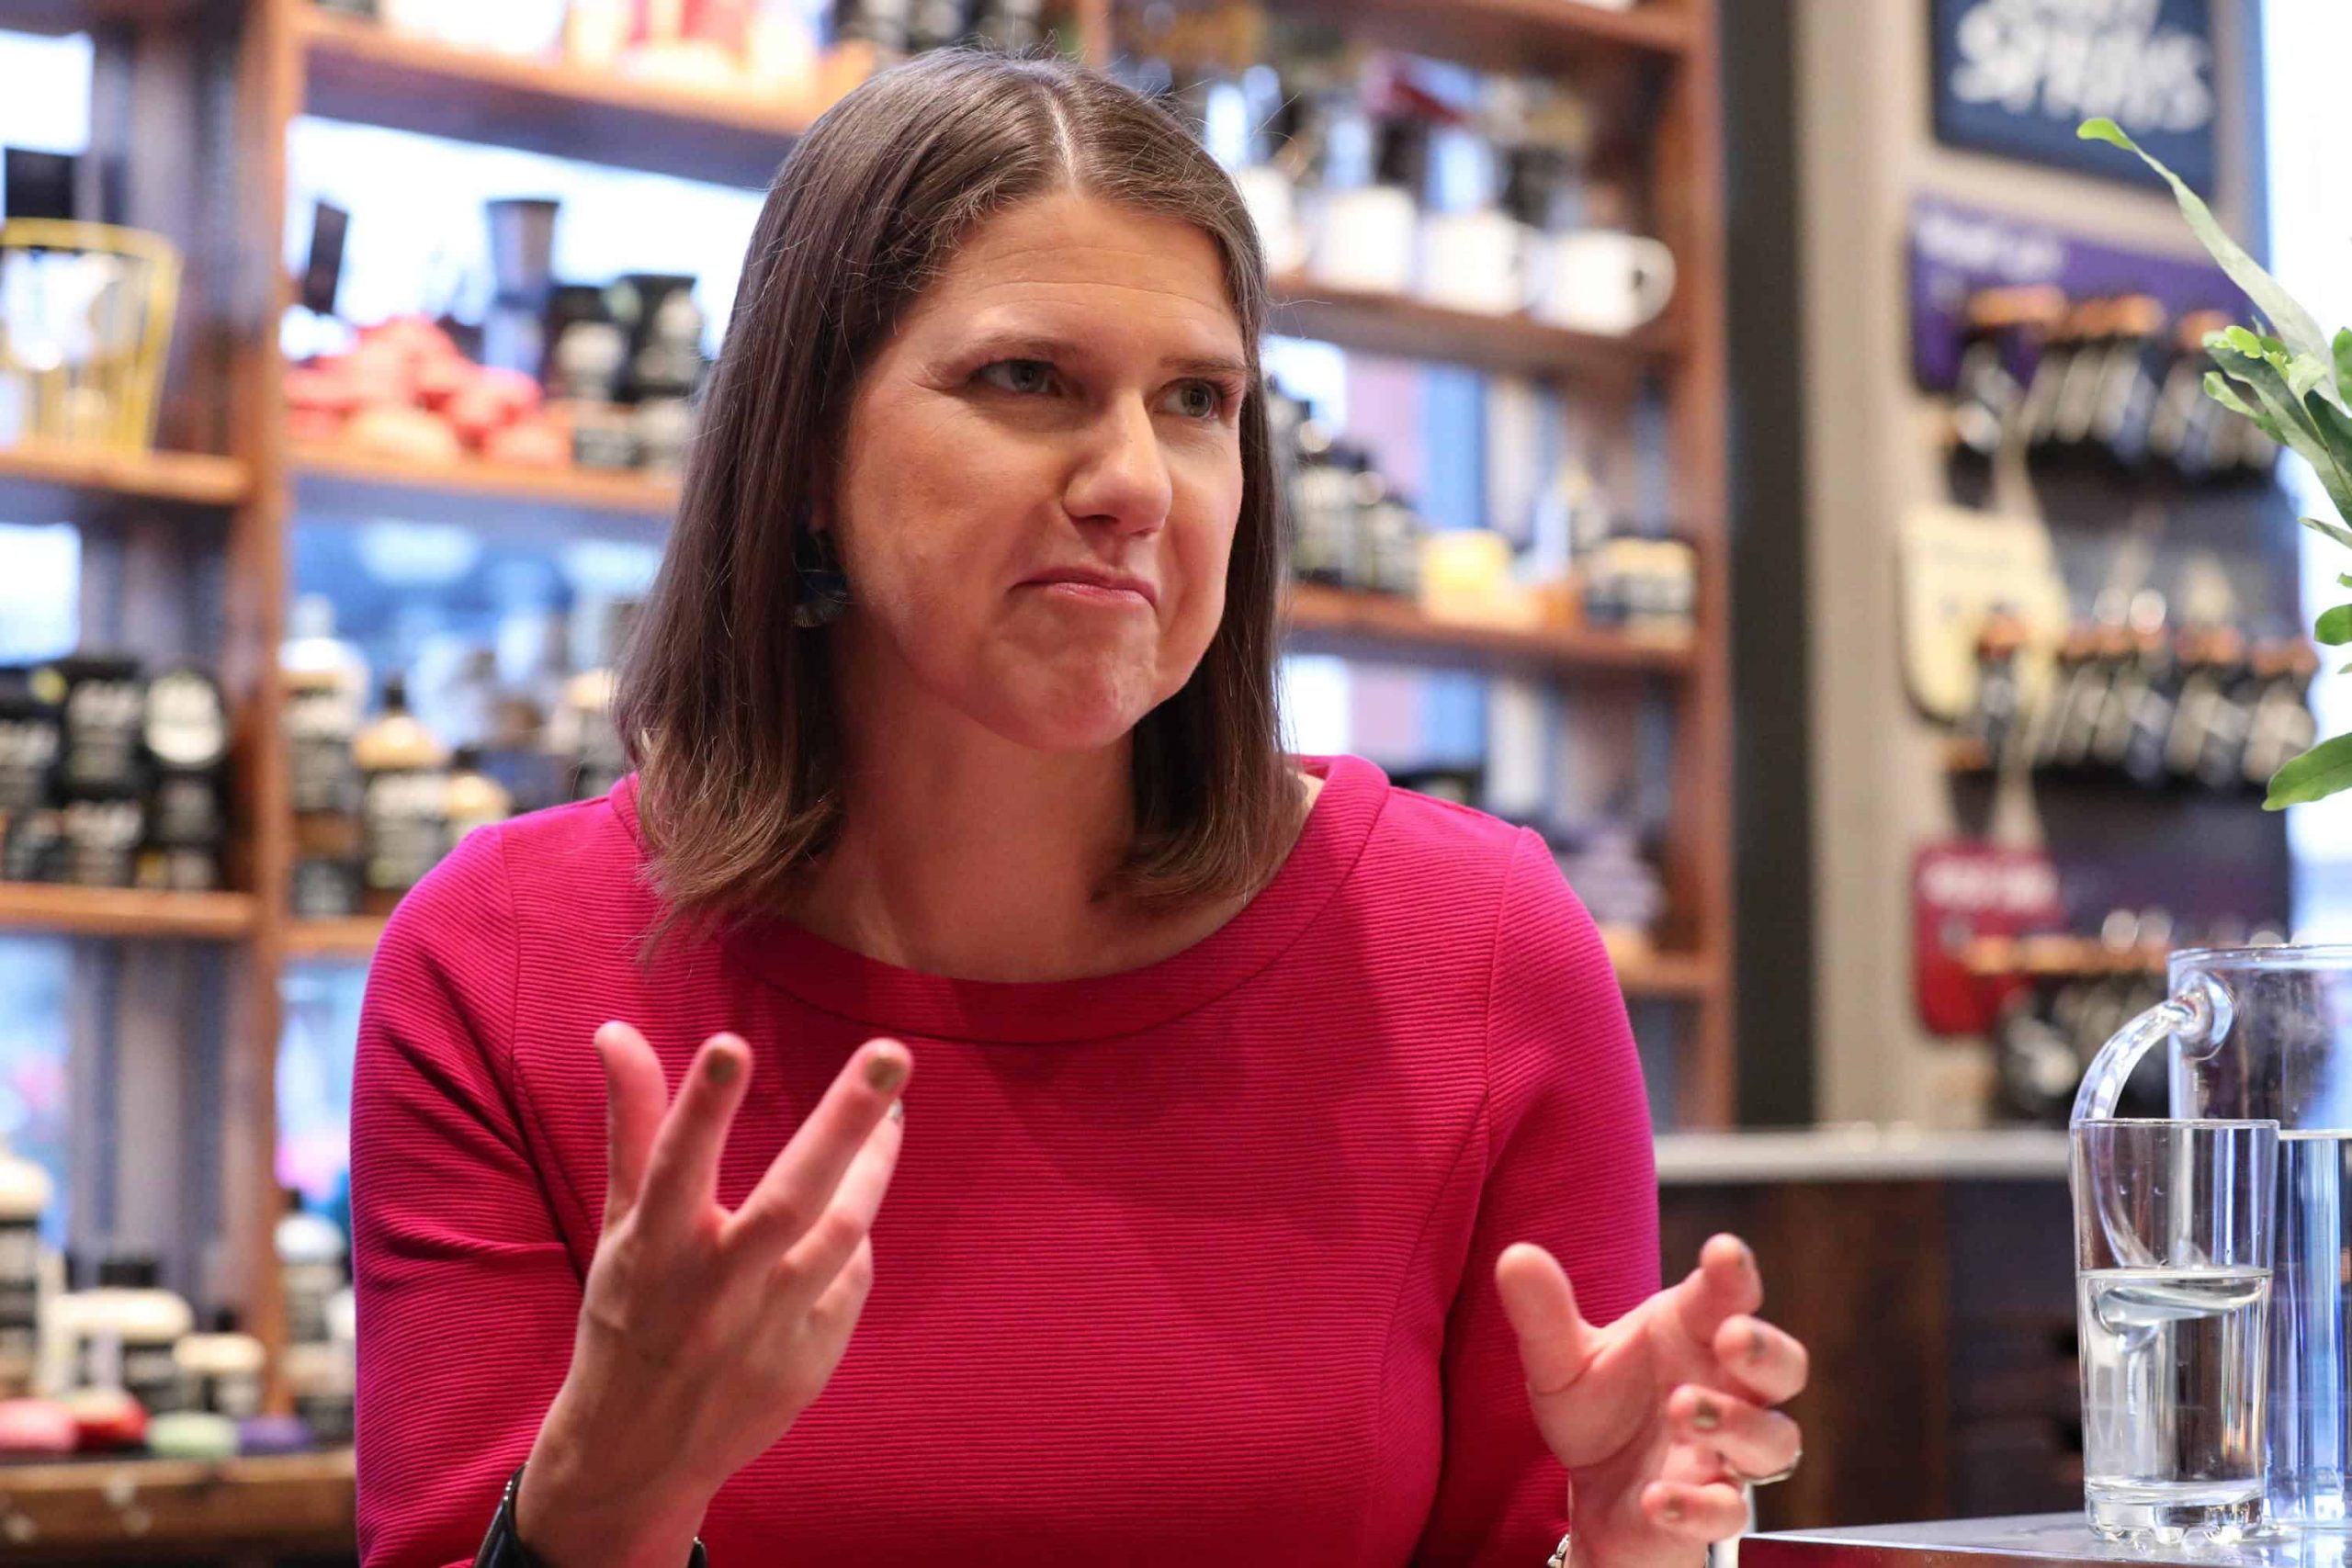 Swinson says Corbyn is ‘not fit to be prime minister’